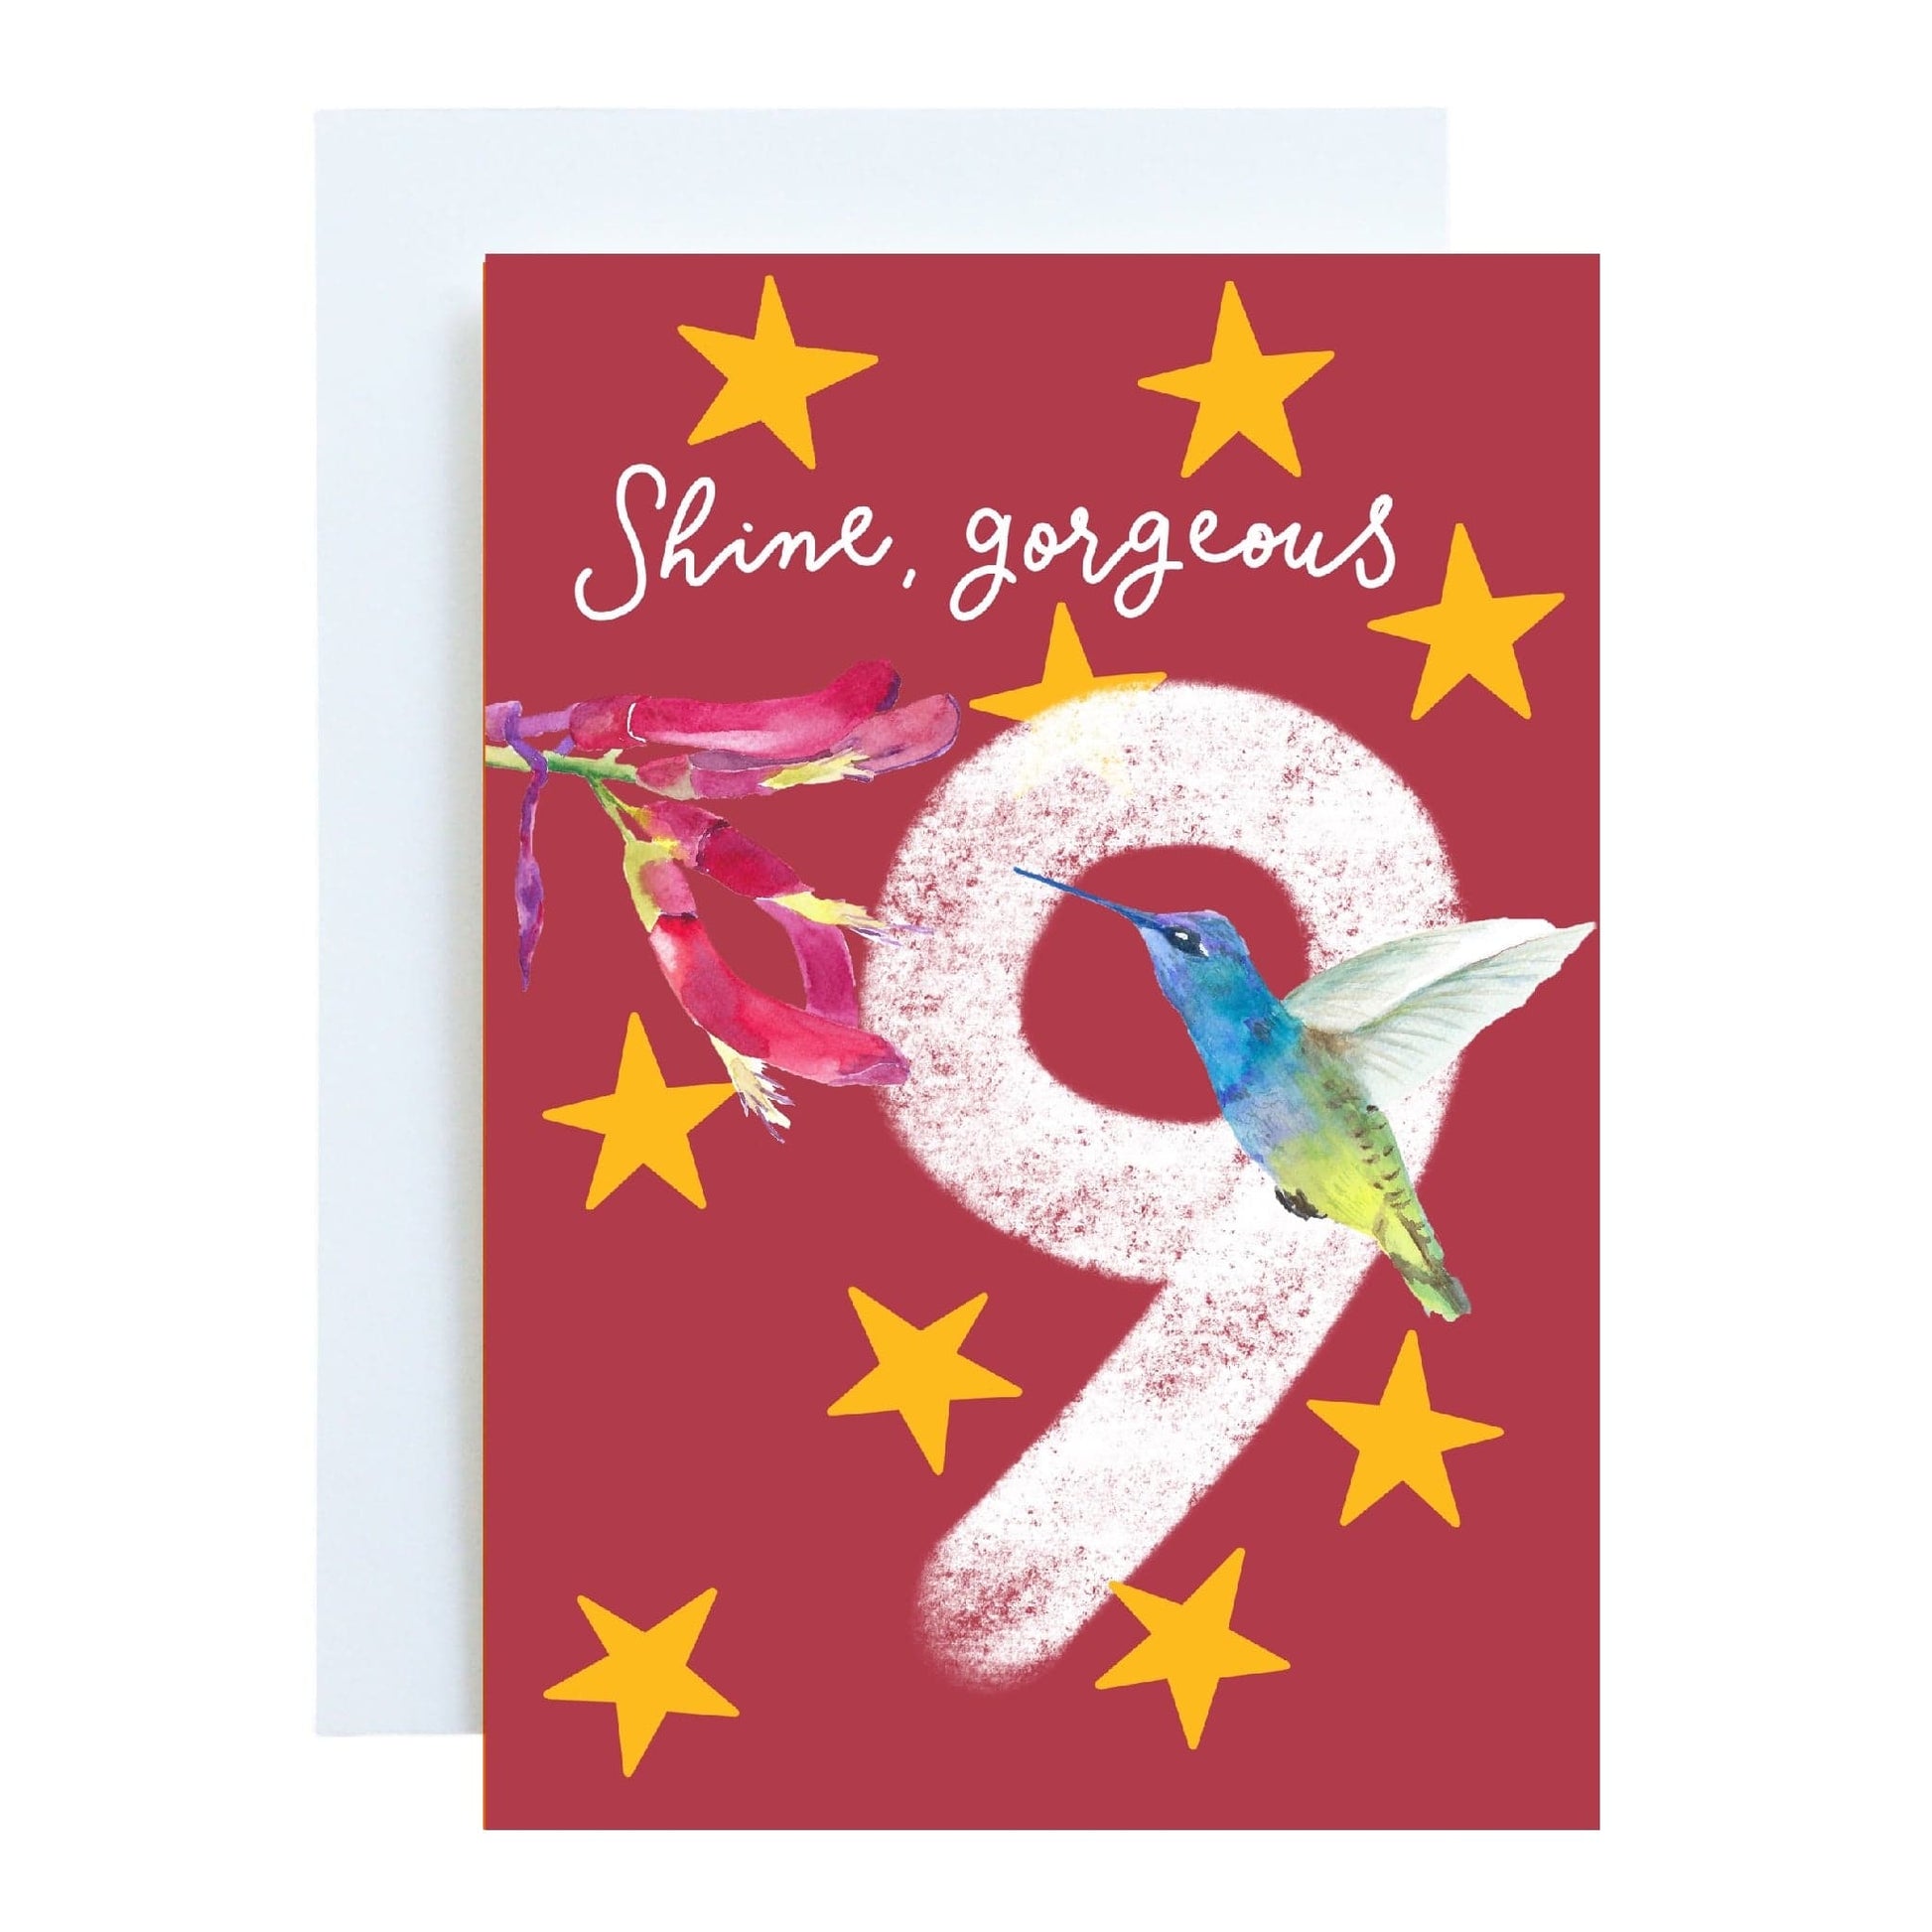 And Hope Designs Cards 9 - Ninth birthday Card - Bright “Shine Gorgeous 9” with hummingbird